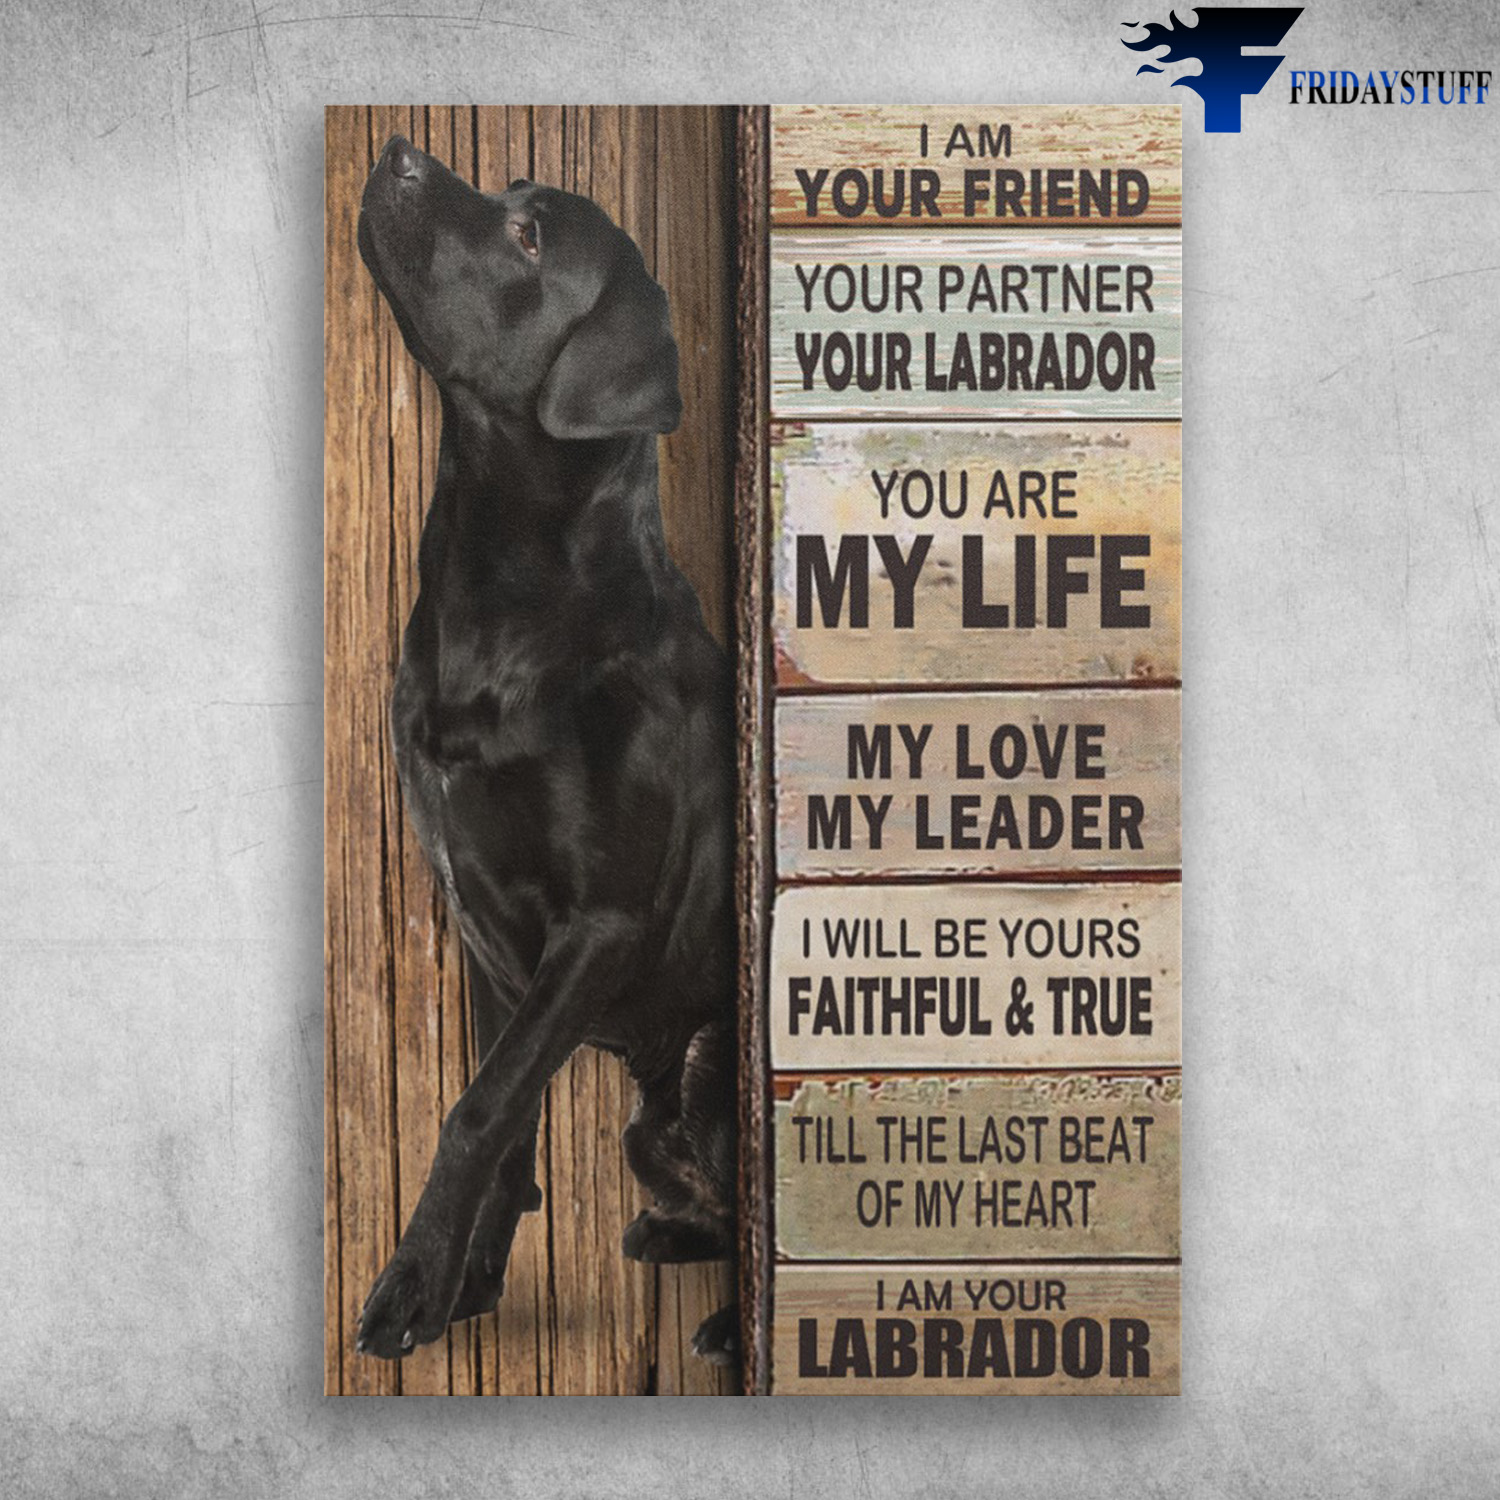 Labrador Dog - I Am Your Friend, Your Partner, Your Labrador, You Are My Life, My Love, My Leader, I Will Be Yours Faithfull And True, Till The Last Beat Of My Heart, I Am Your Labrador